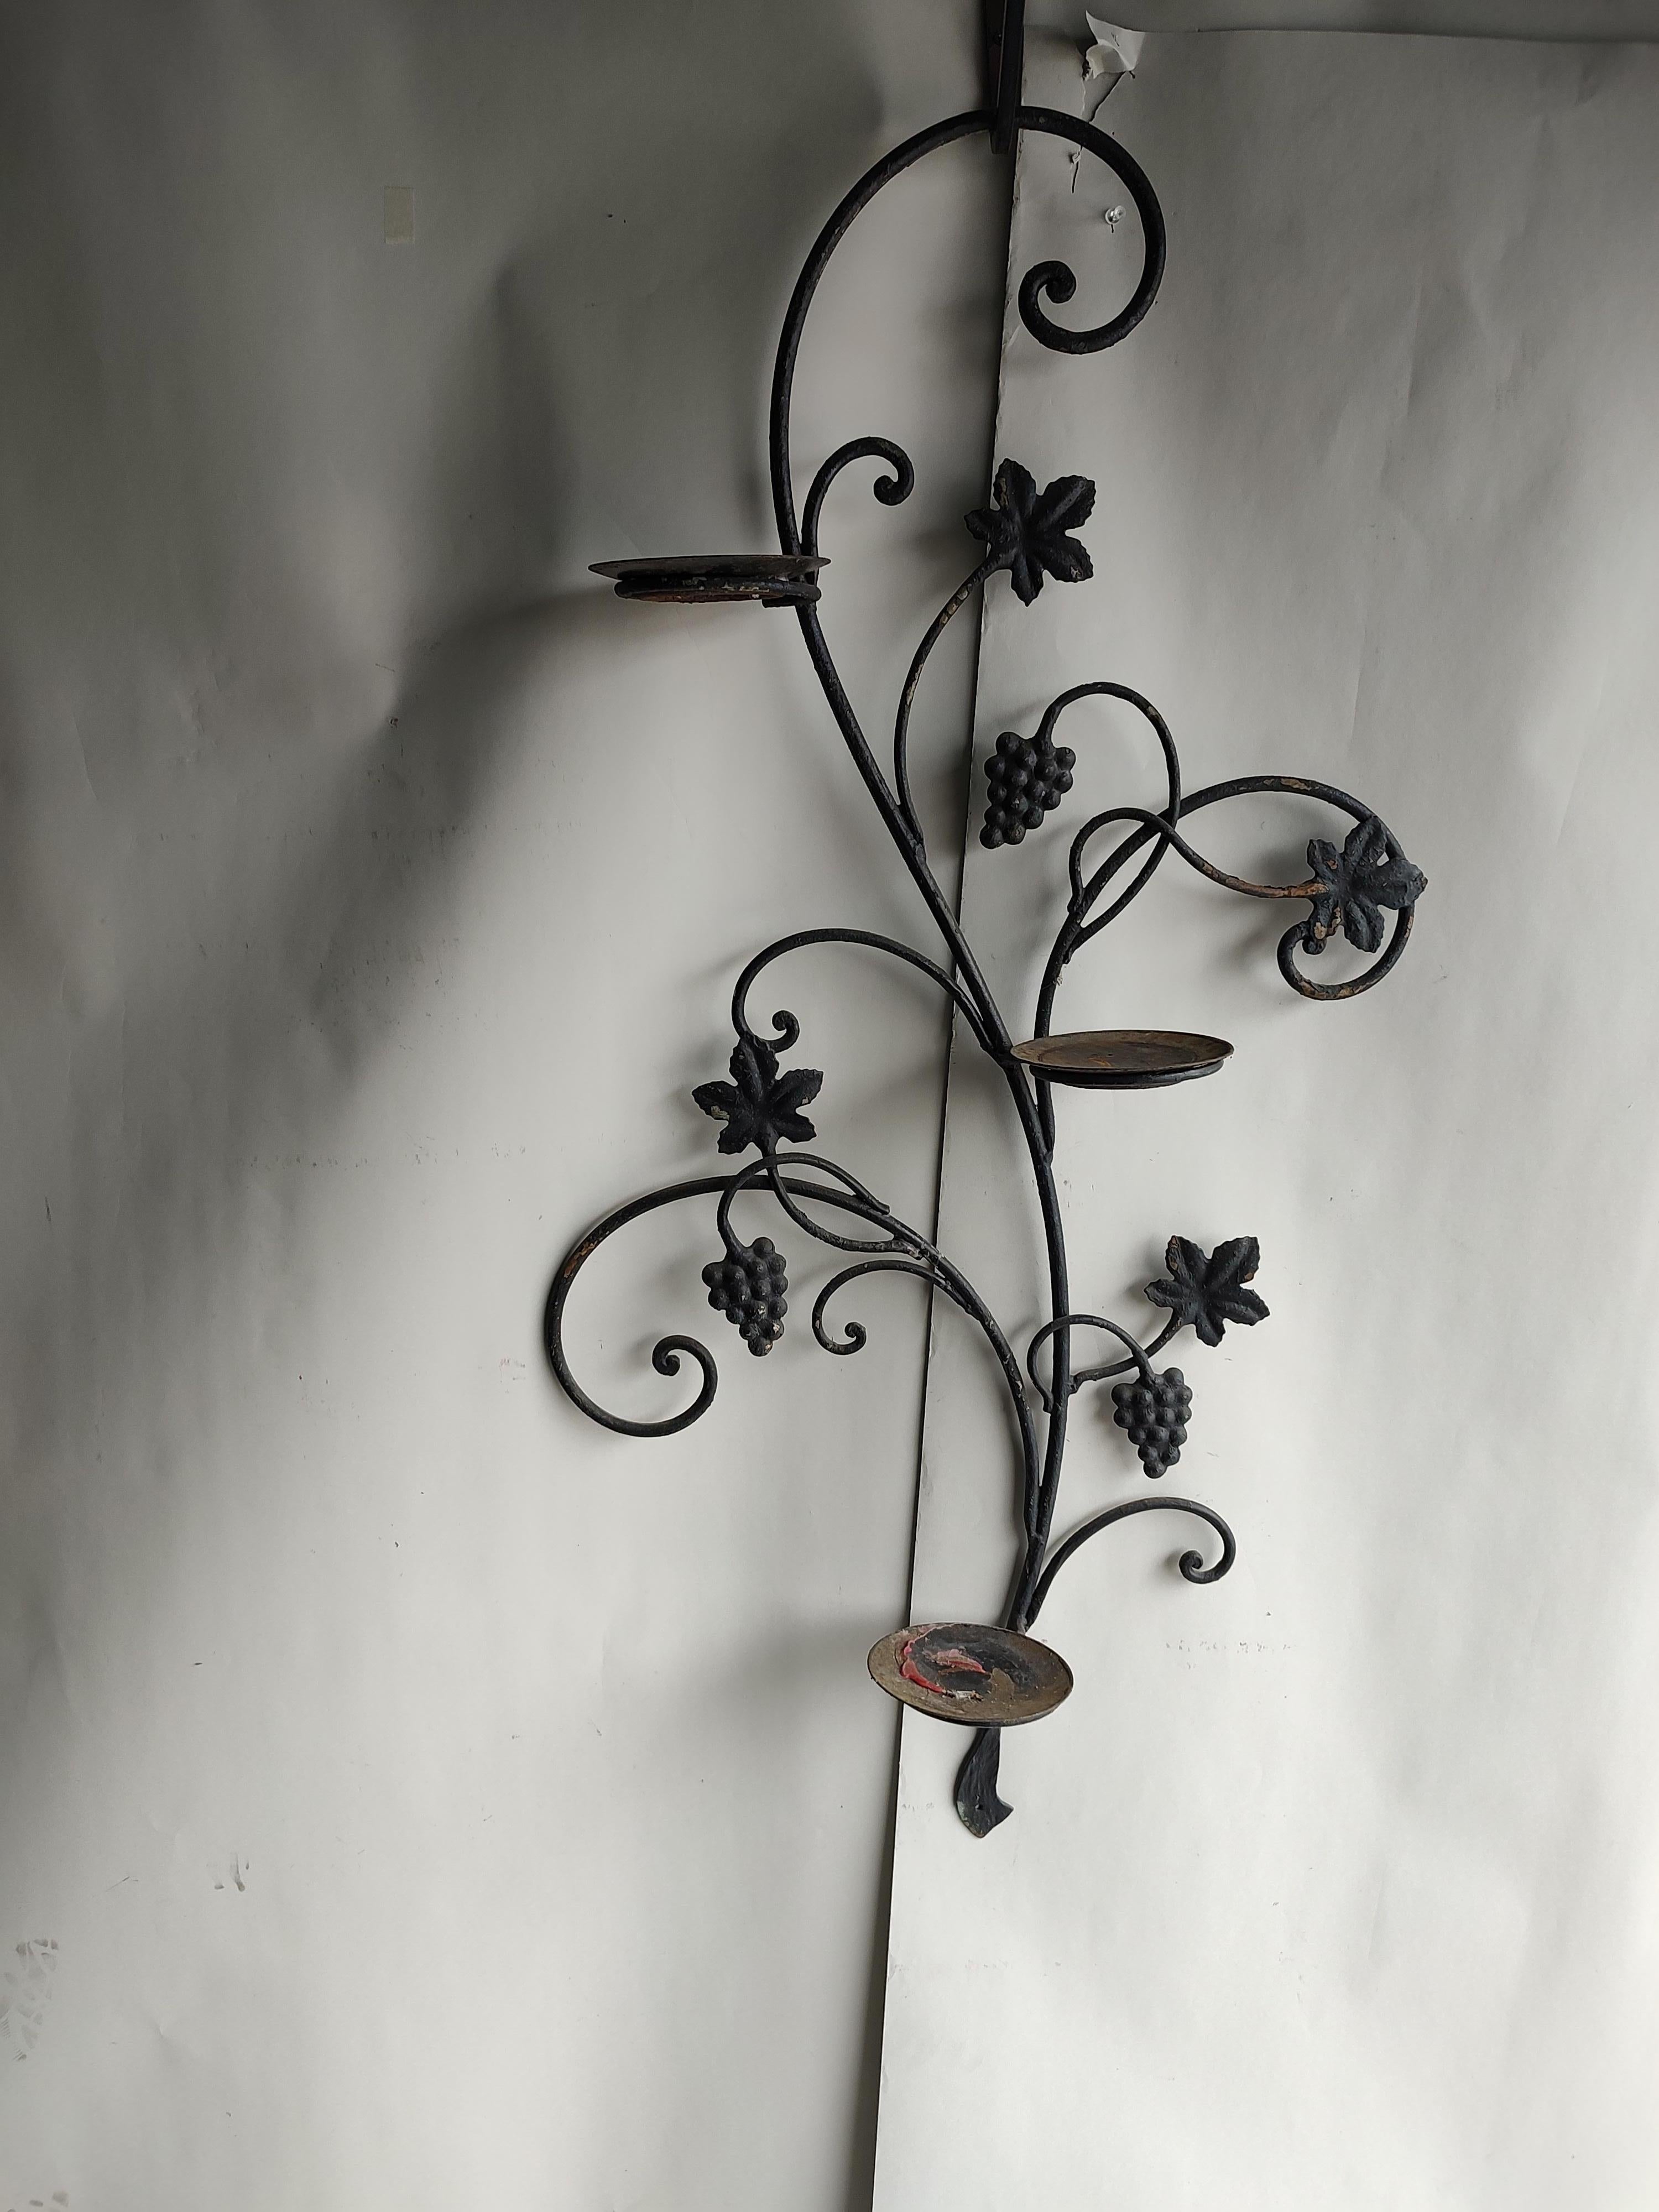 Fabulous decorative iron wall bracket for patio or outdoor use. Has three holders for candles plants or vases or any combo. Grape with leaf decorative casting with old black paint. In excellent vintage condition with lots of patina.